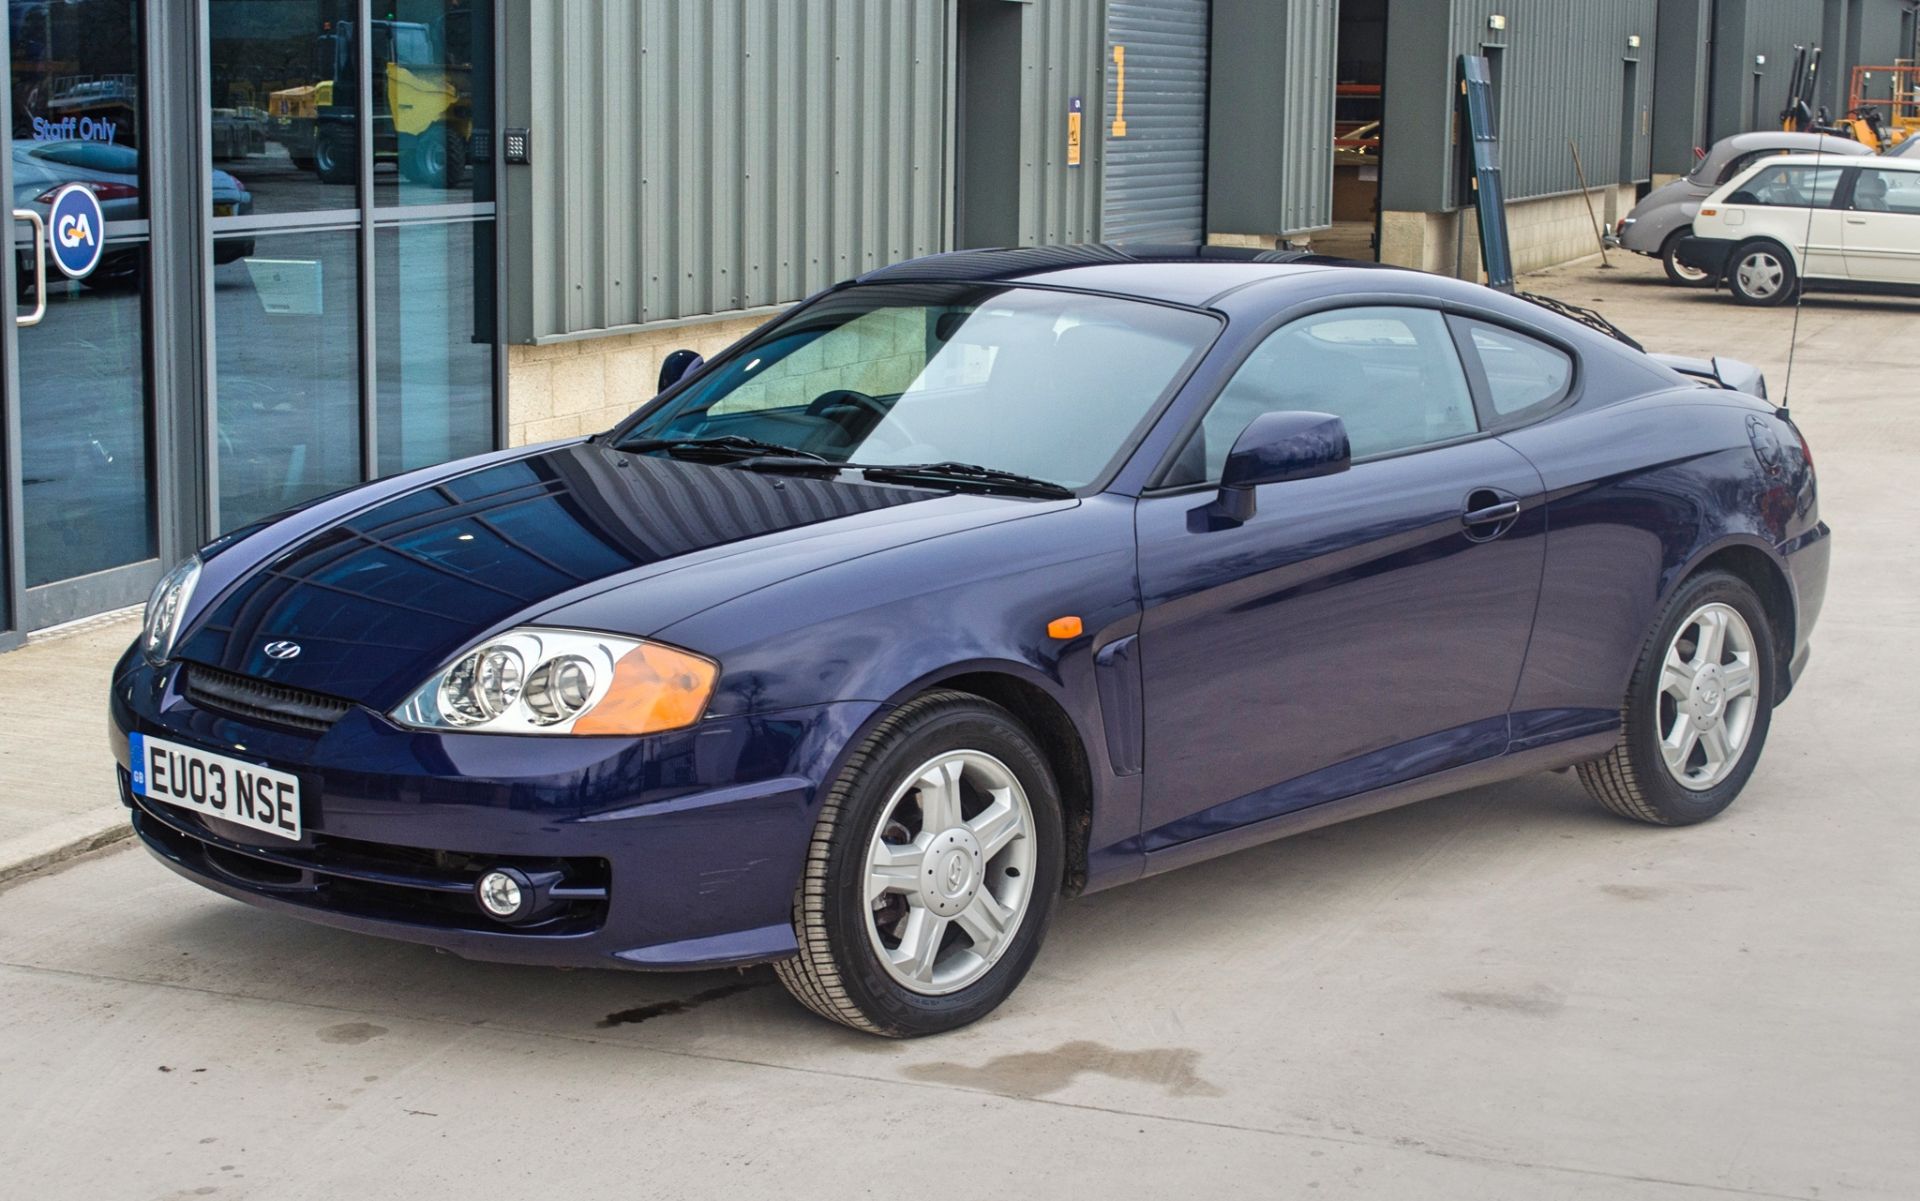 2003 Hyundai Coupe 1.6 S 1600 cc 3 door coupe - Image 4 of 56